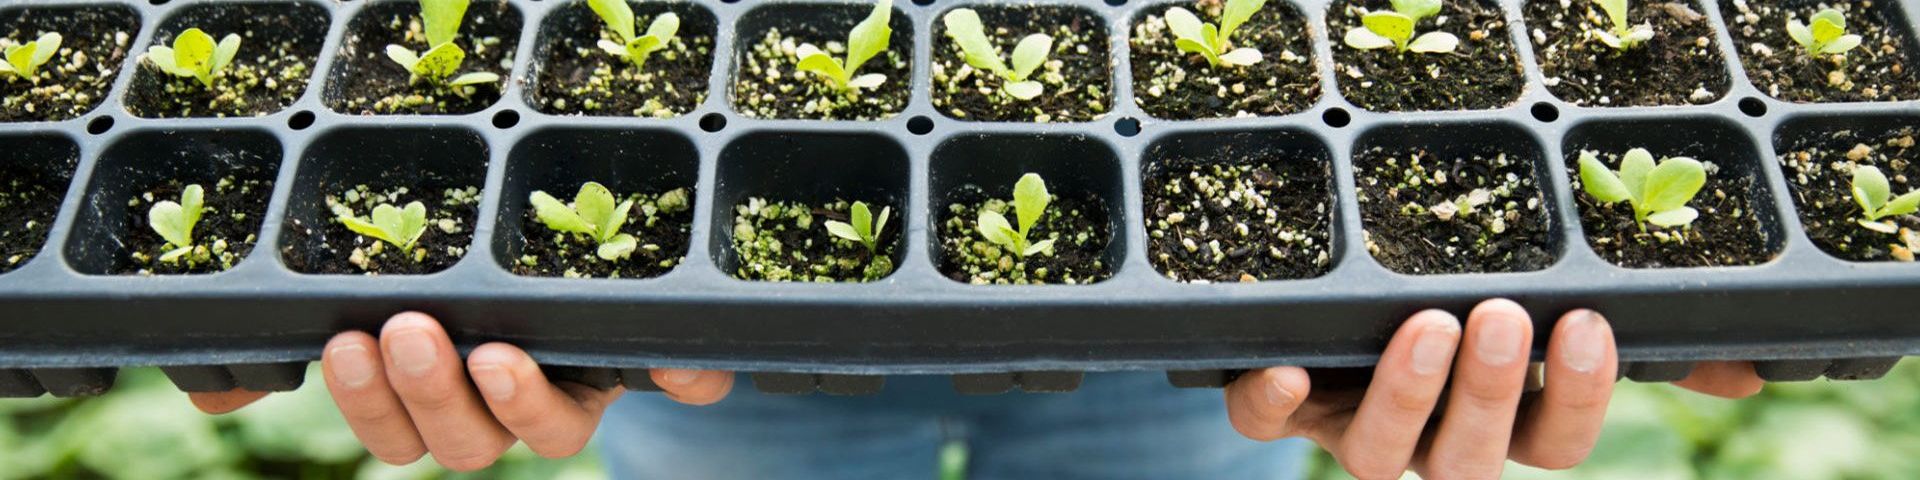 A pair of hands holds a black tray of green seedlings.